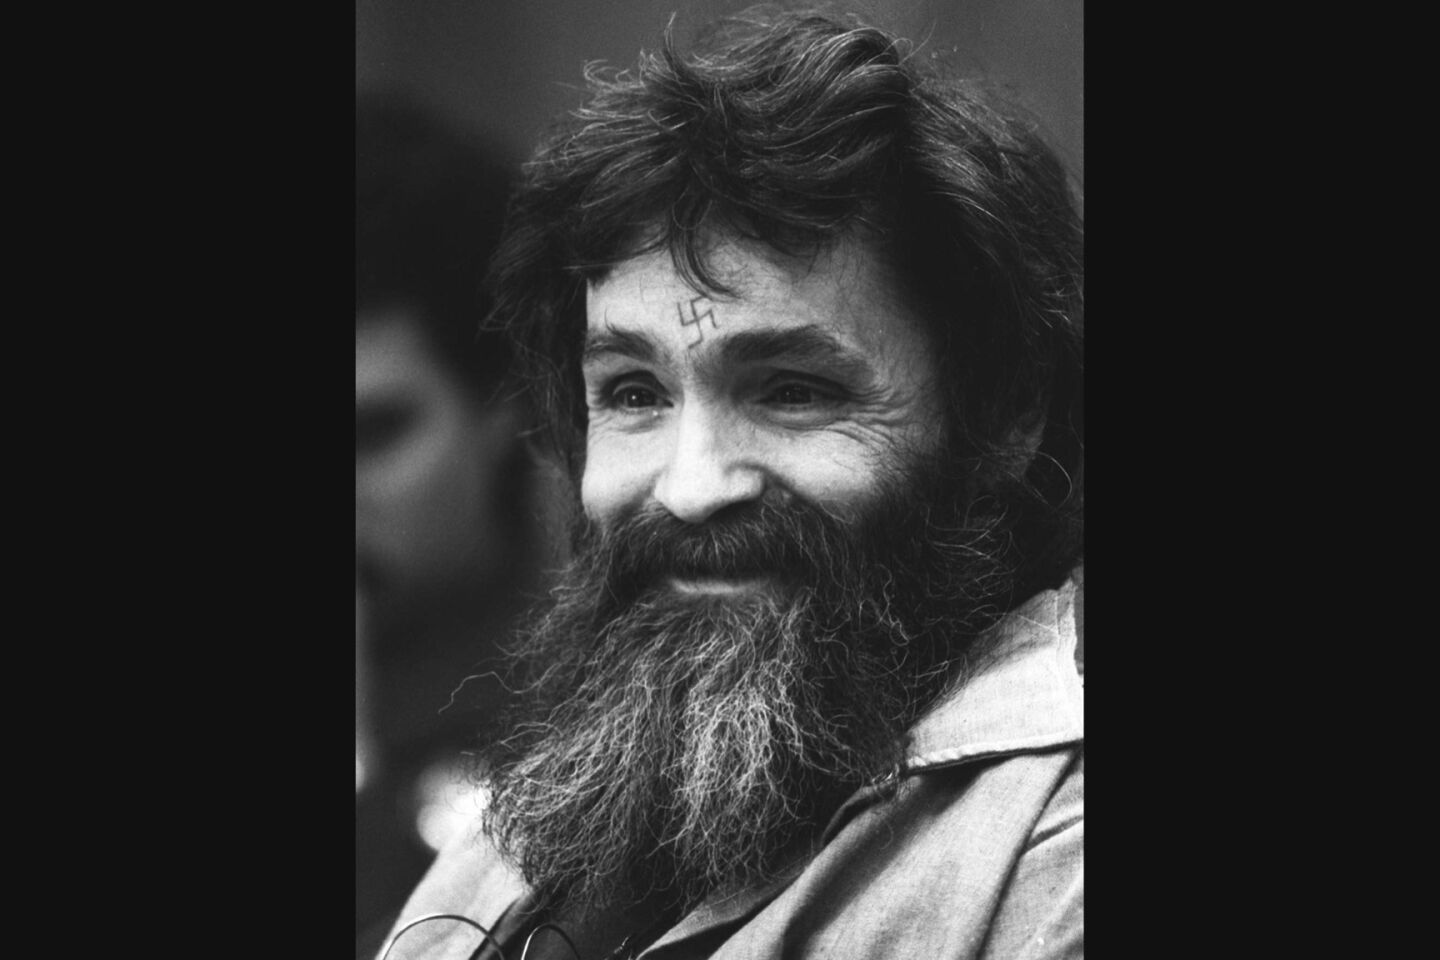 Charles Manson receives the news that he was denied parole in 1997, for the ninth time in March, 1997.